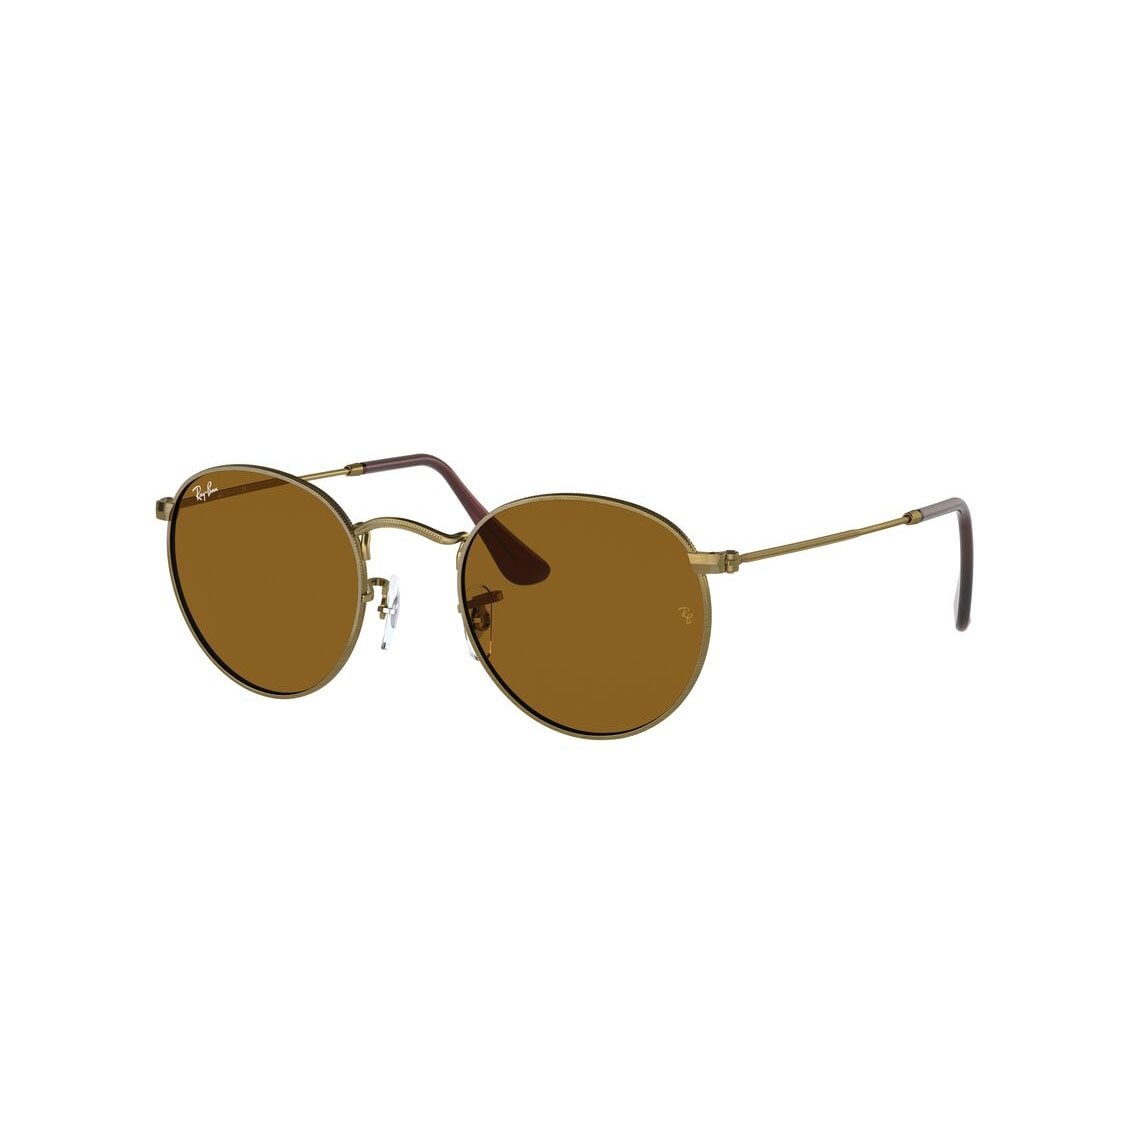 Ray-Ban Round Metal RB3447 922833 5321